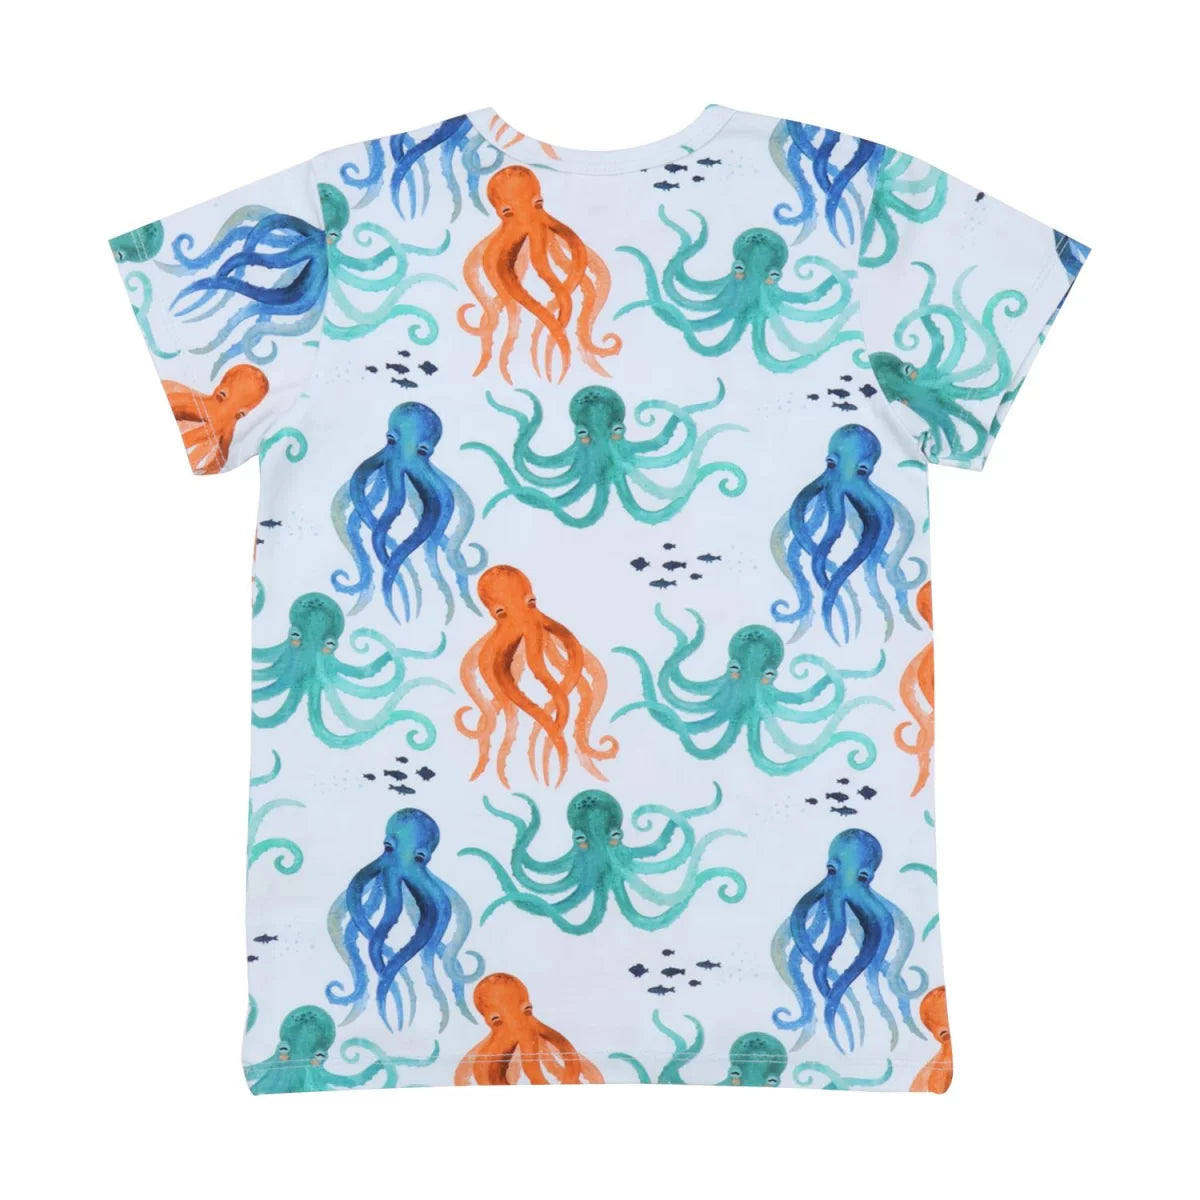 Walkiddy T-Shirt funny Octopuses